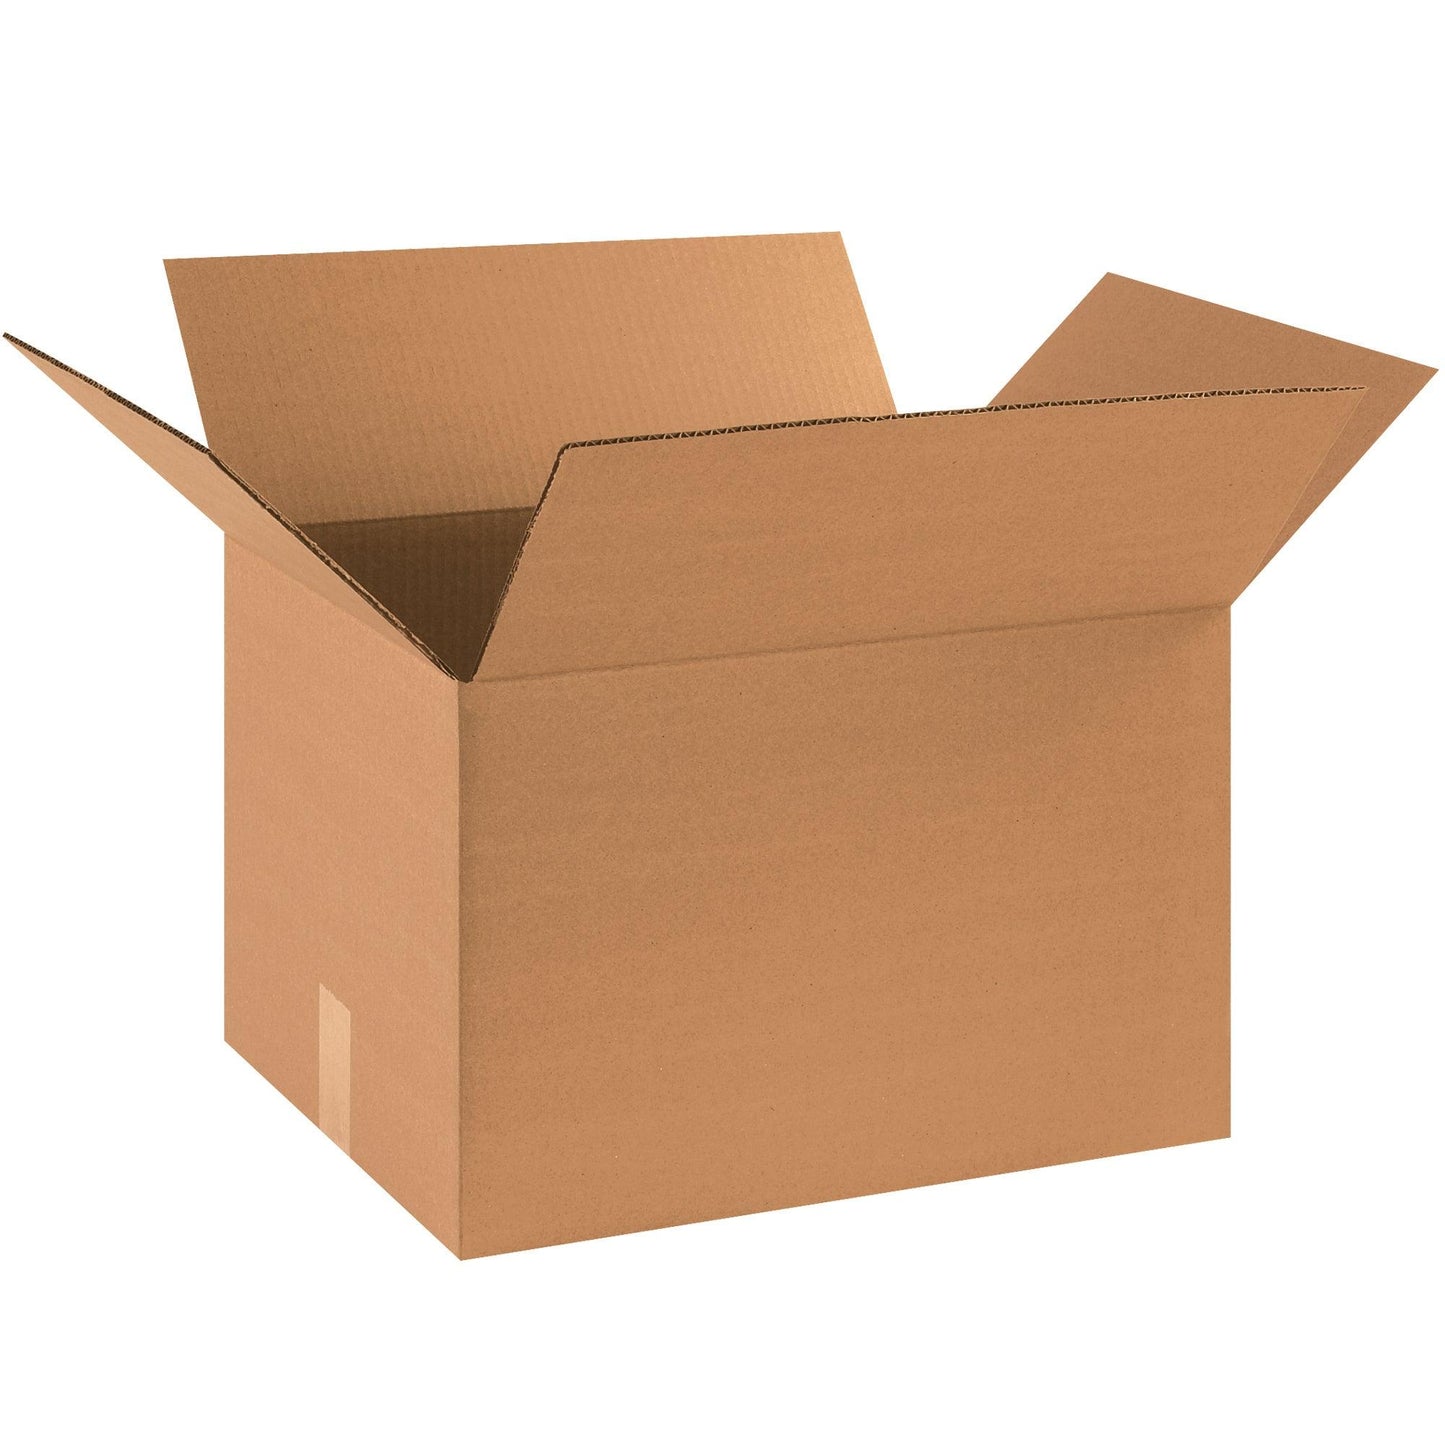 18 x 14 x 12" (10 Pack) Corrugated Boxes - 181412RP10